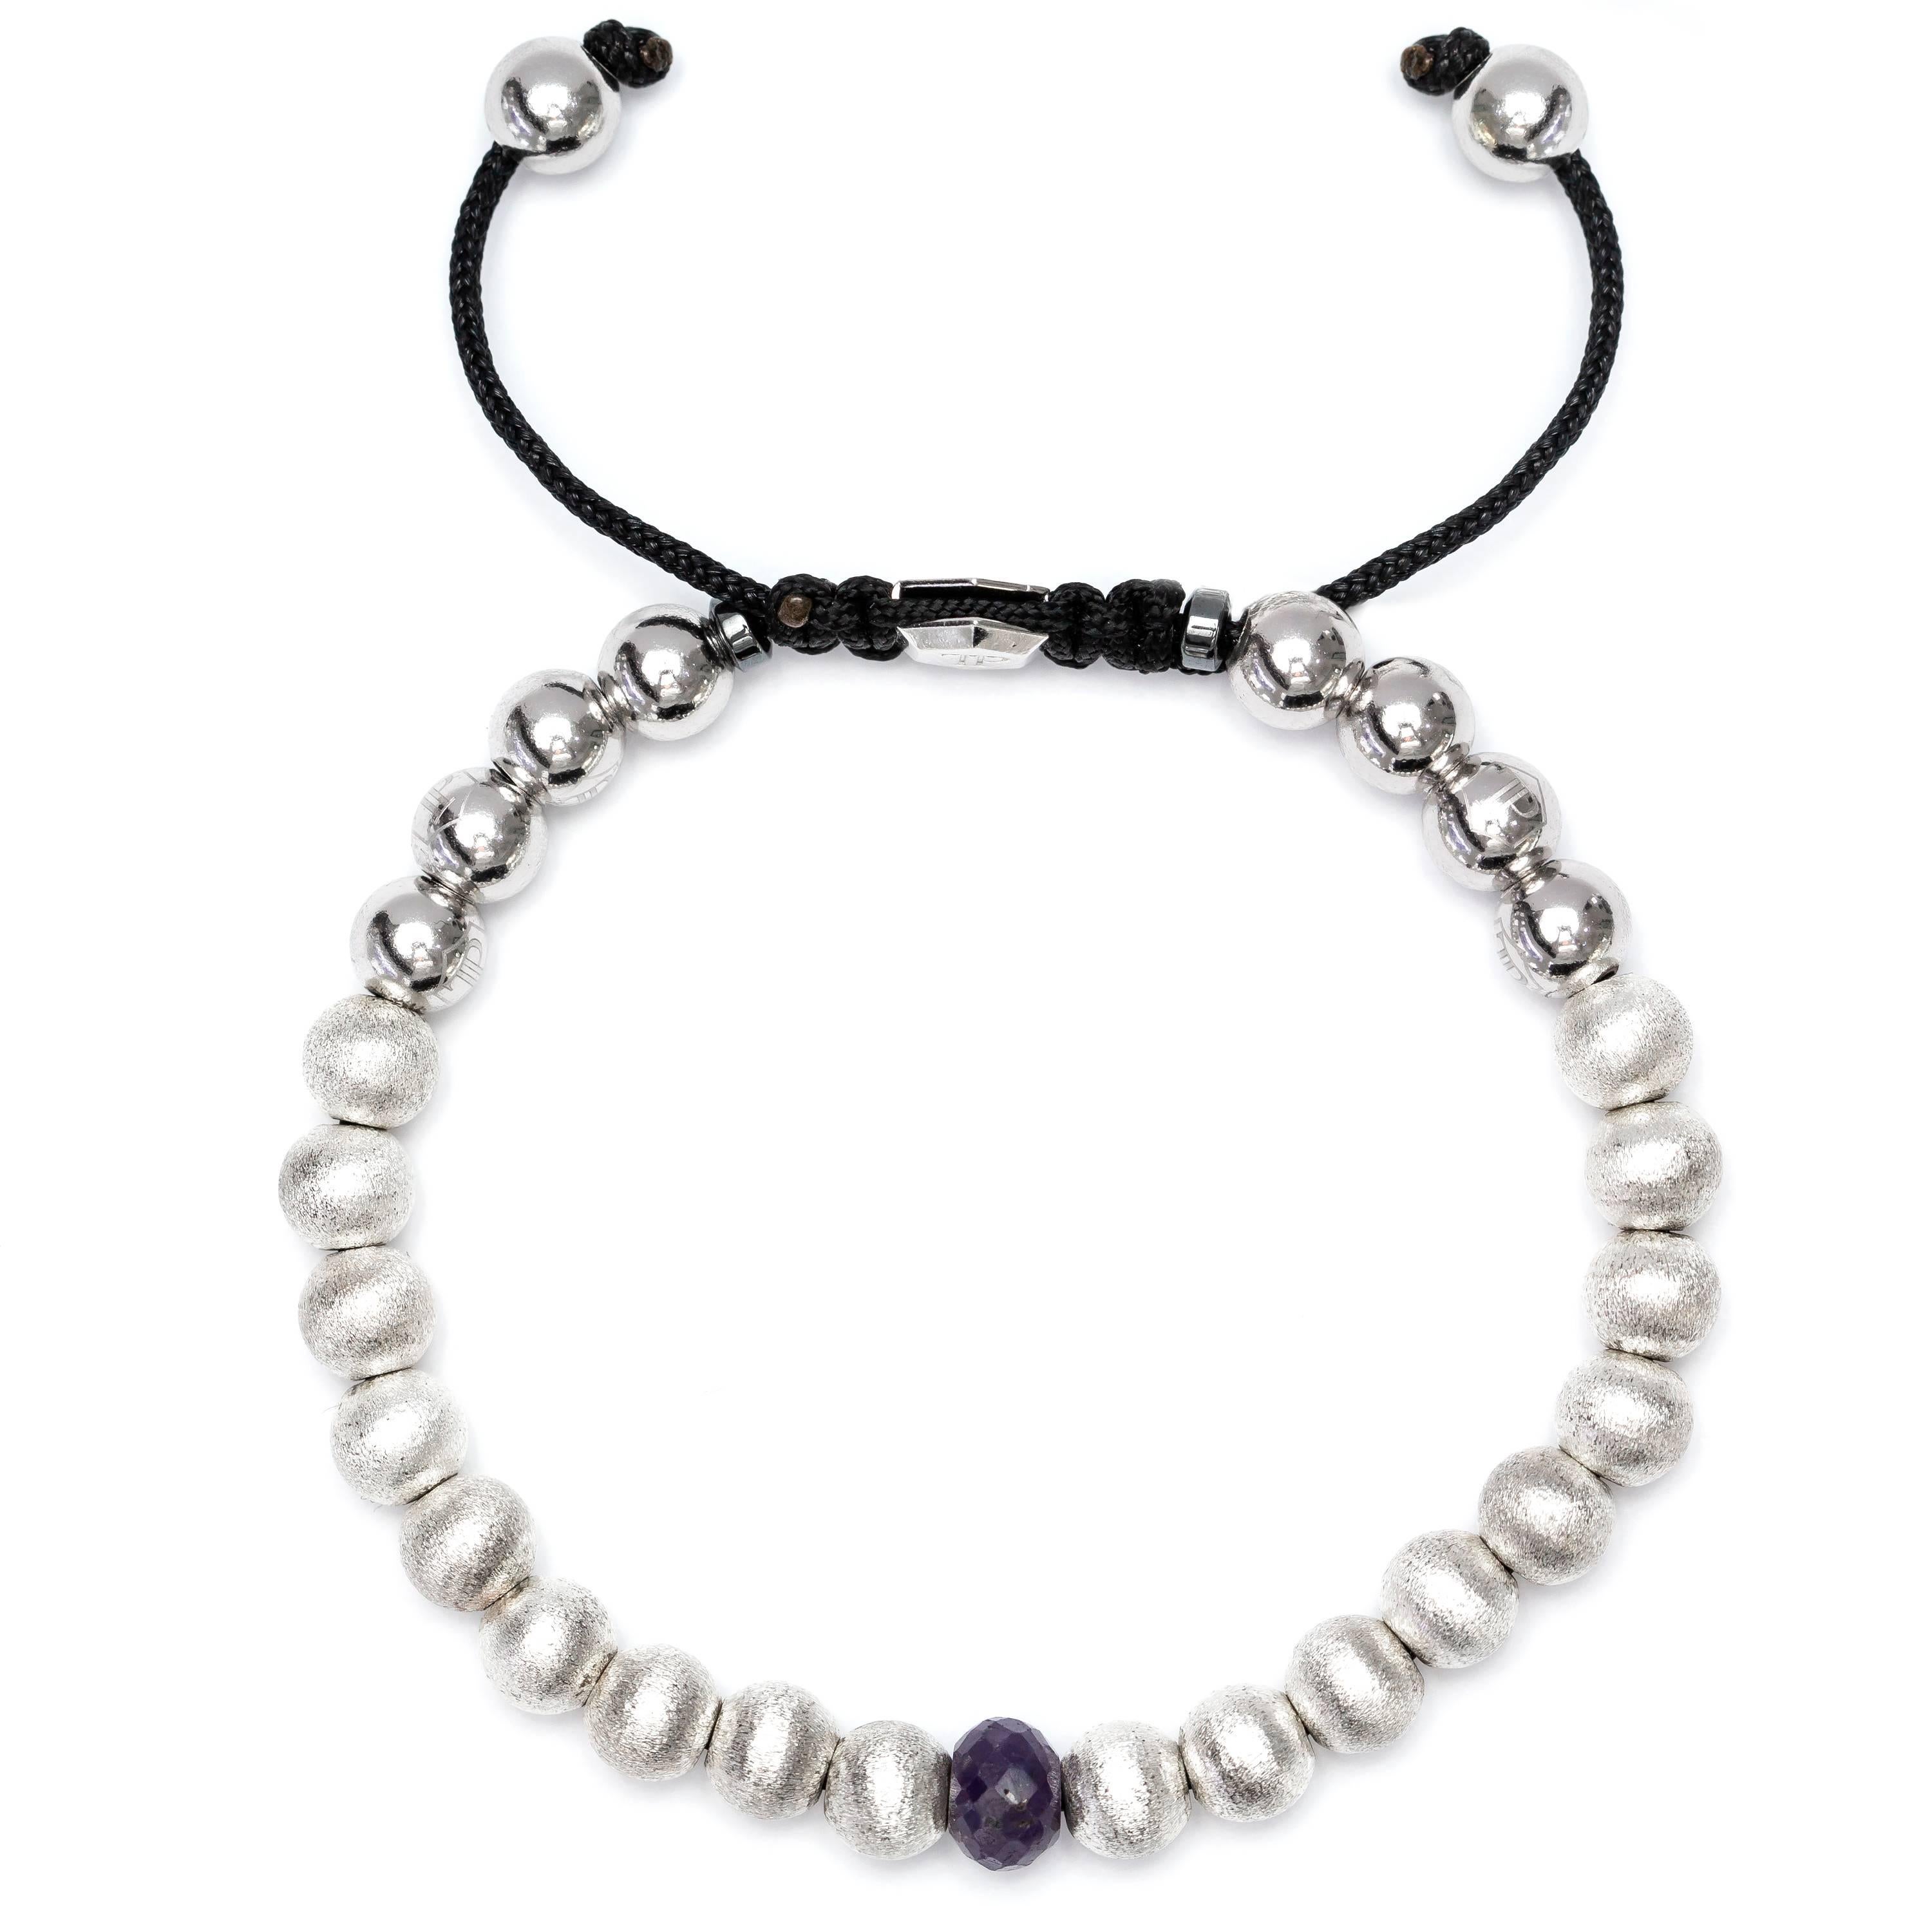 This 1.91 Carat Blue Sapphire Stainless Steel and Silver beaded bracelet from The Original Tresor Paris Caresse Blue Collection. This Bracelet features 18 satin beads and 8 Stainless Steel beads and two Magnetite rings with a Silver Hexagon Tresor